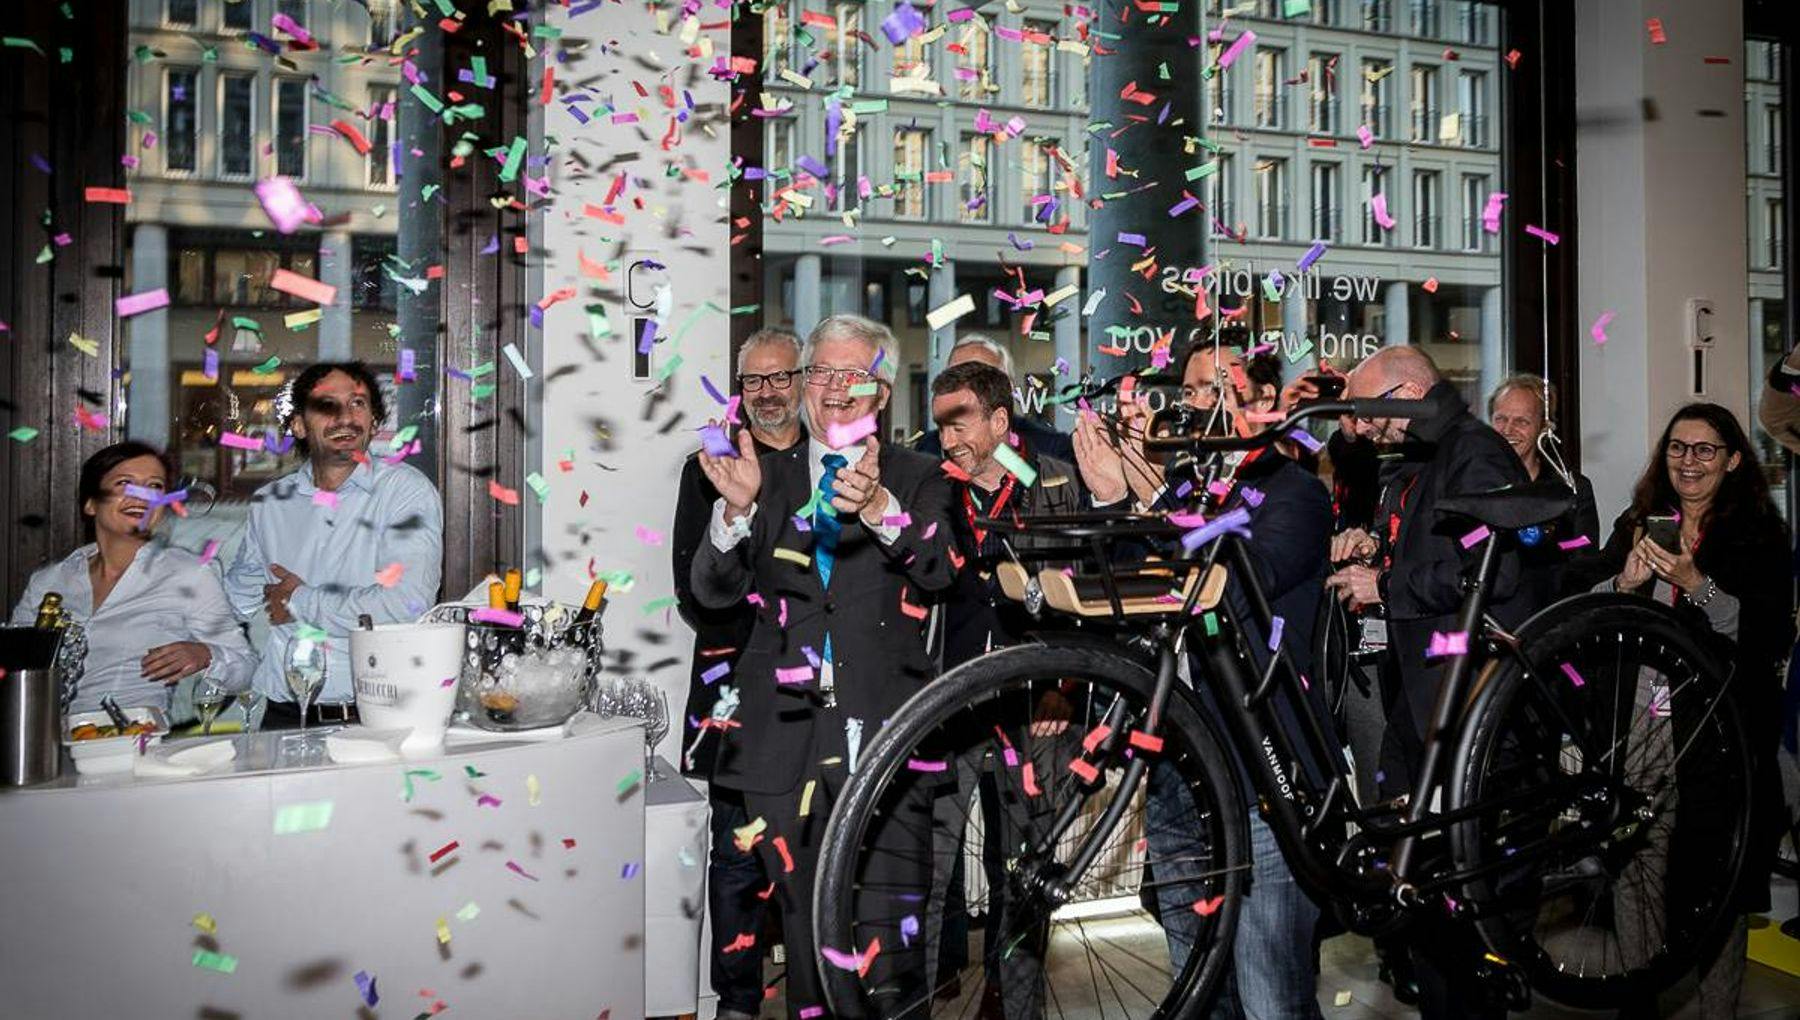 Launch of a VanMoof bike at office, confetti everywhere, people chearing